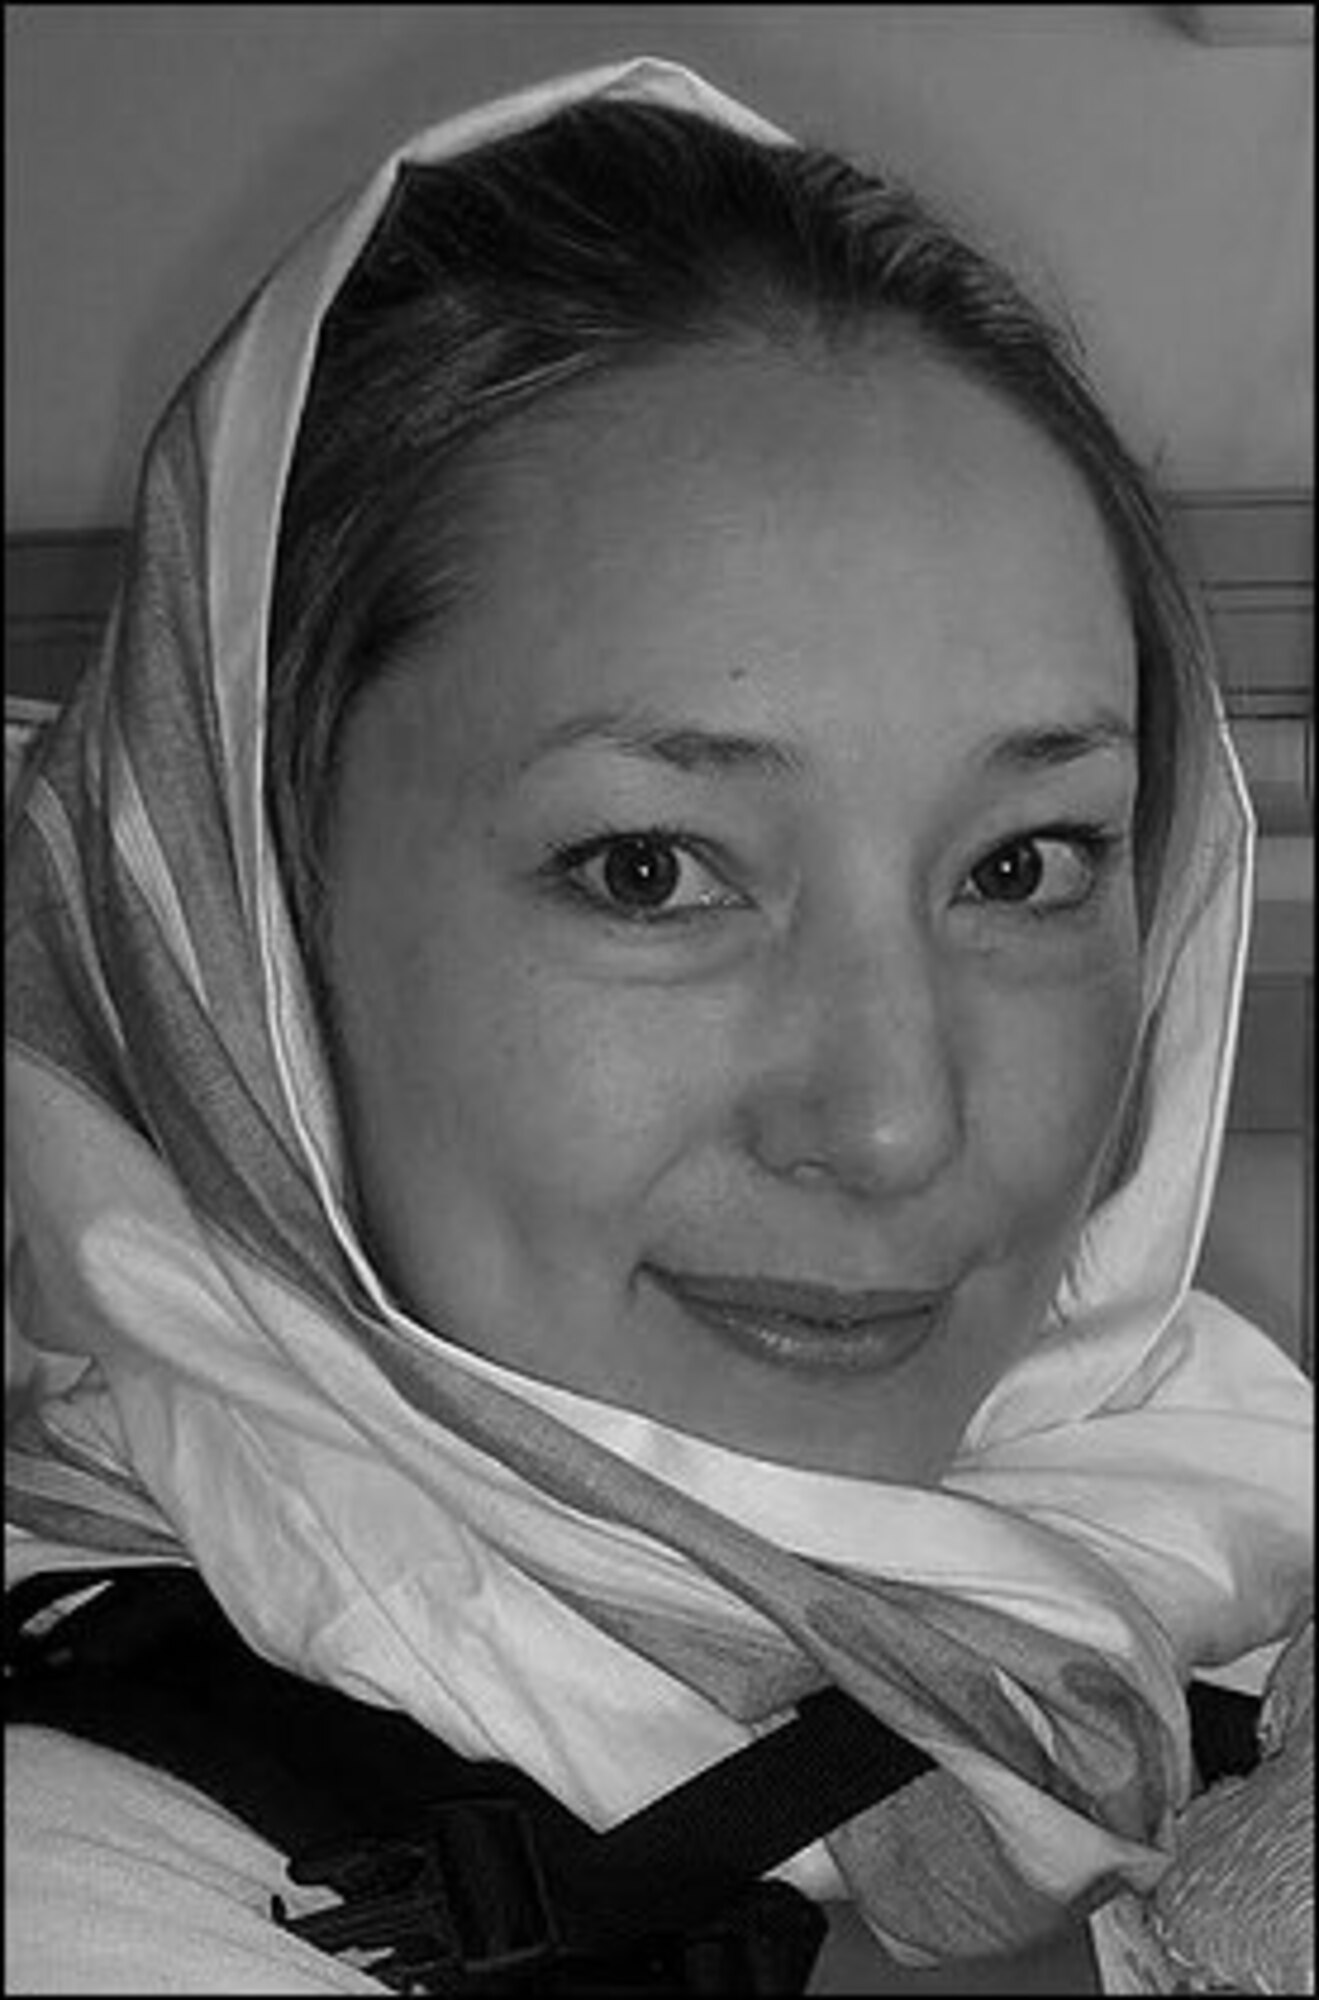 British surgeon, Dr. Karen Woo, was one of 10 members of an all-civilian medical team killed by Taliban insurgents Aug. 7, 2010. (Courtesy photo)